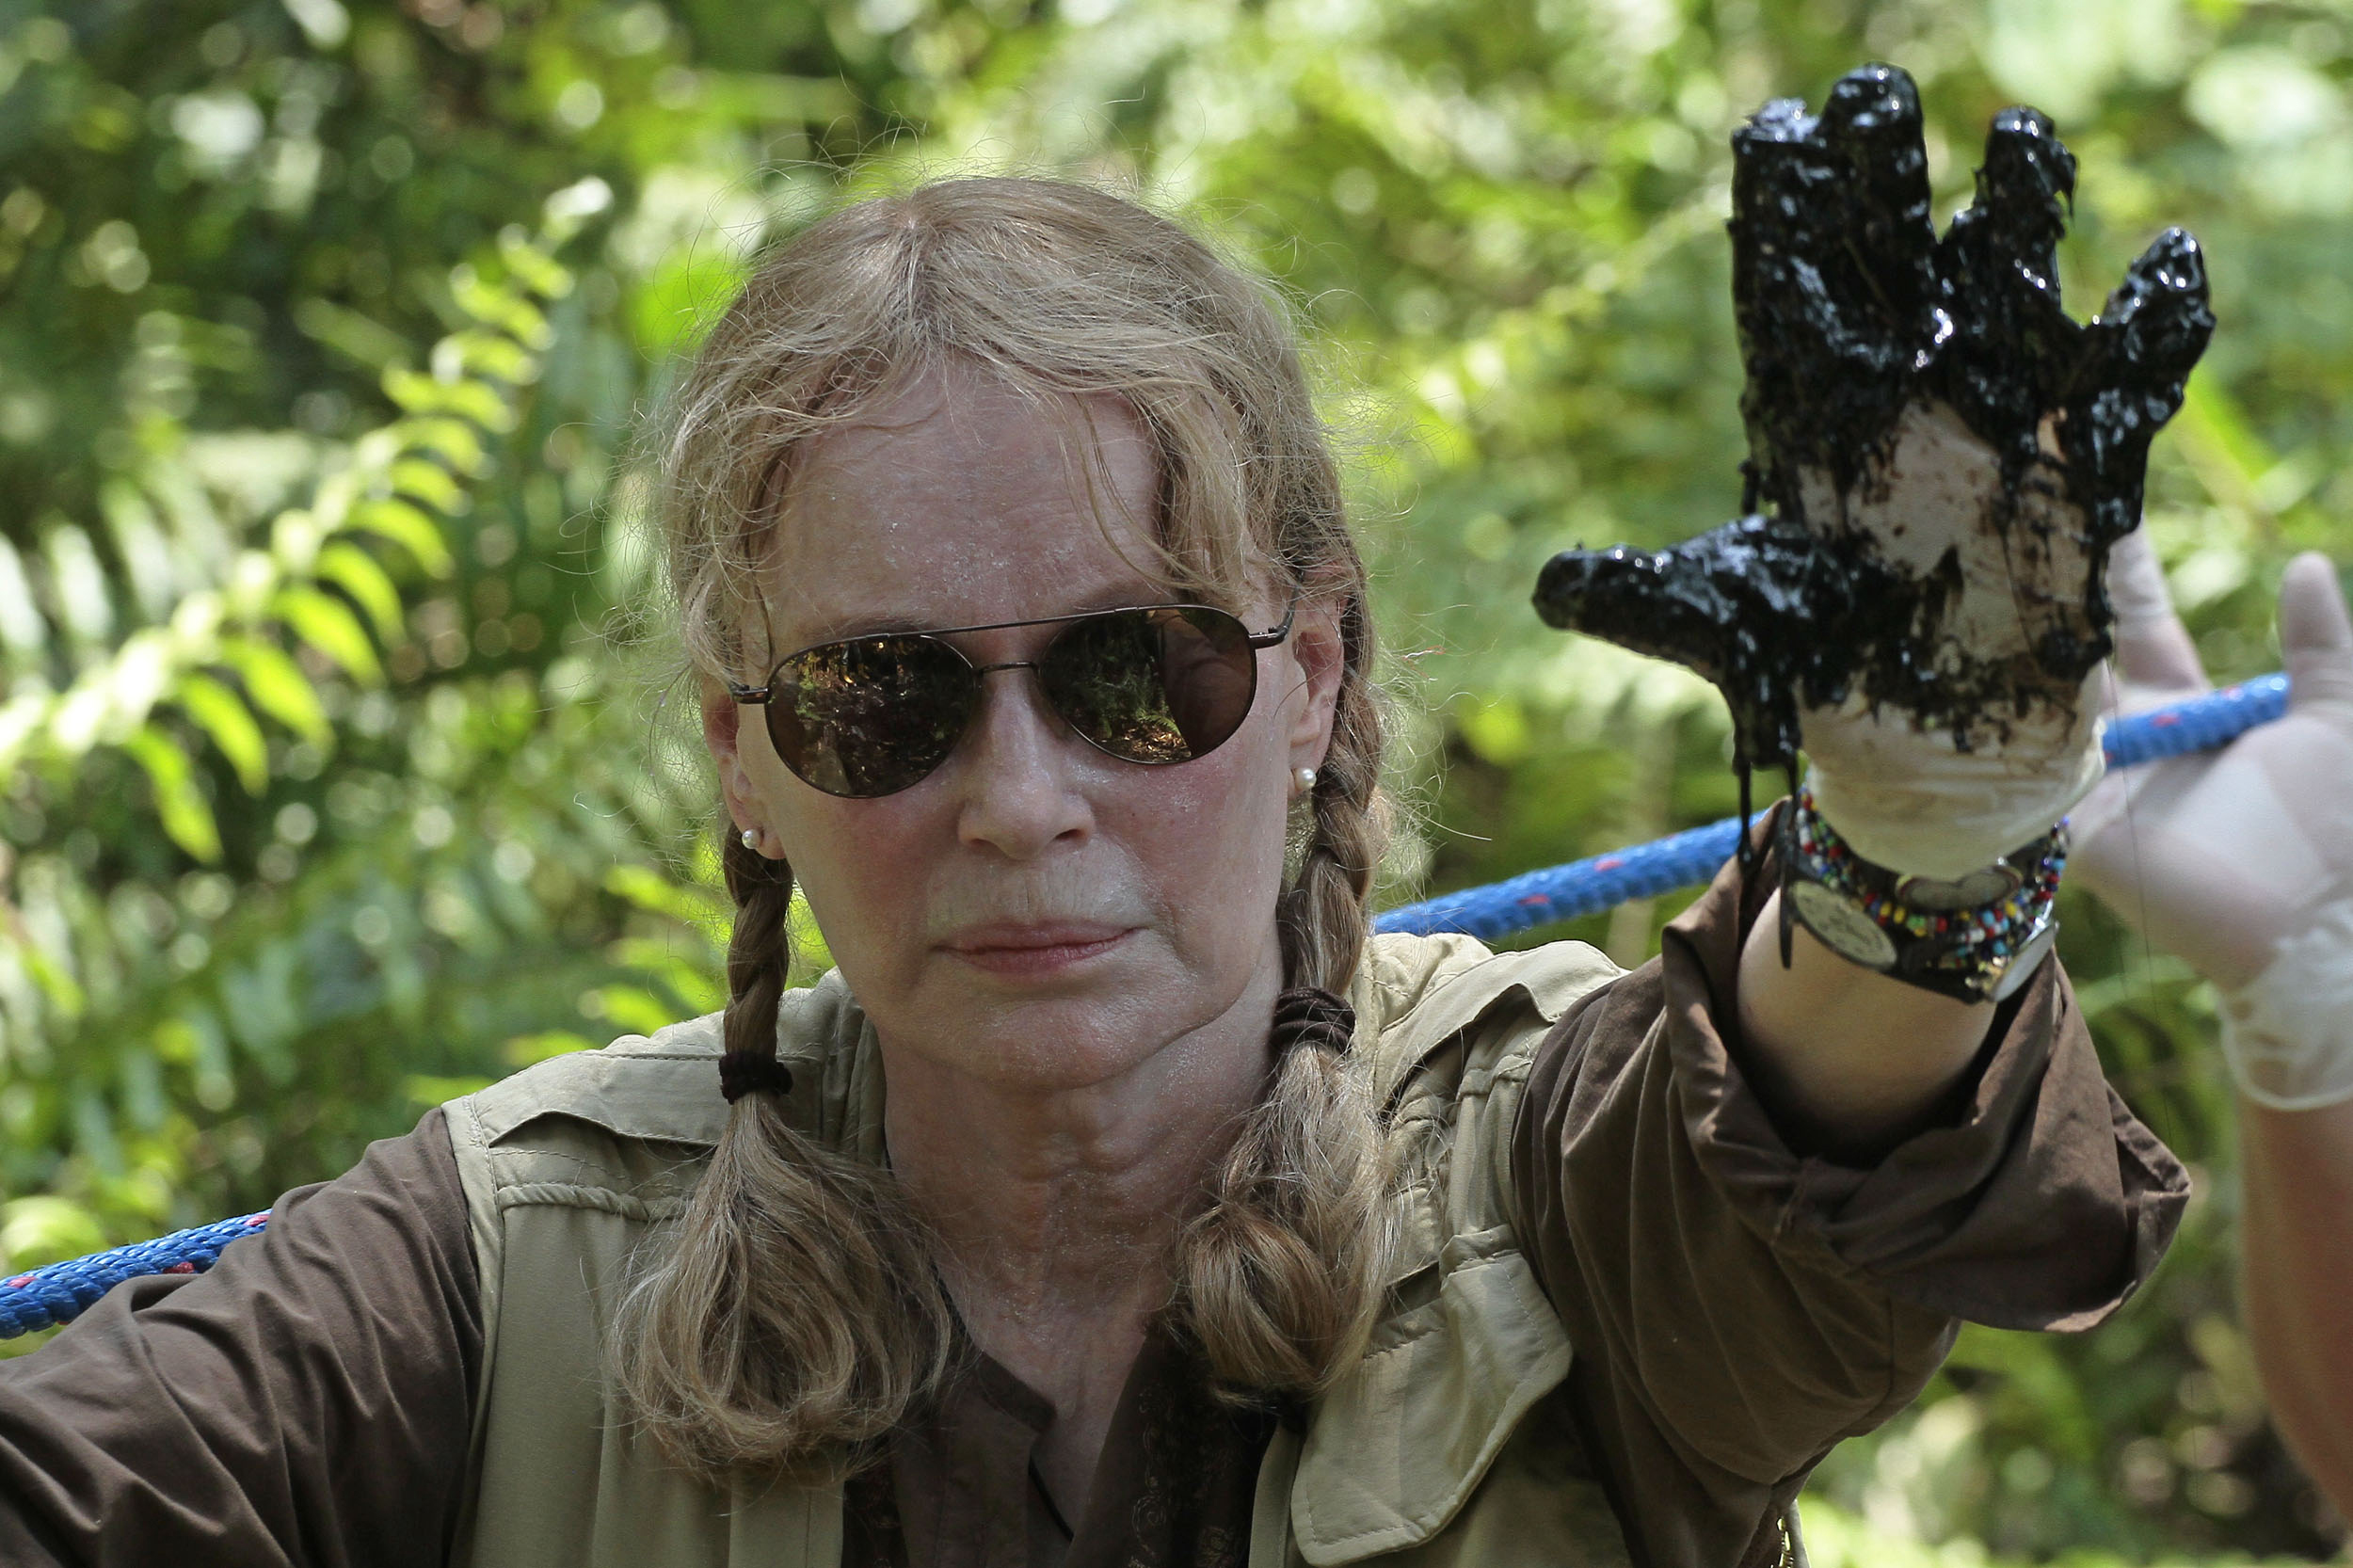 US actress Mia Farrow shows her left hand soiled with oil during a visit to an Amazonic area affected by pollution created by US oil company Chevron, in Lago Agrio, Aguarico, Ecuador, on January 28, 2014. AFP PHOTO/JUAN CEVALLOS